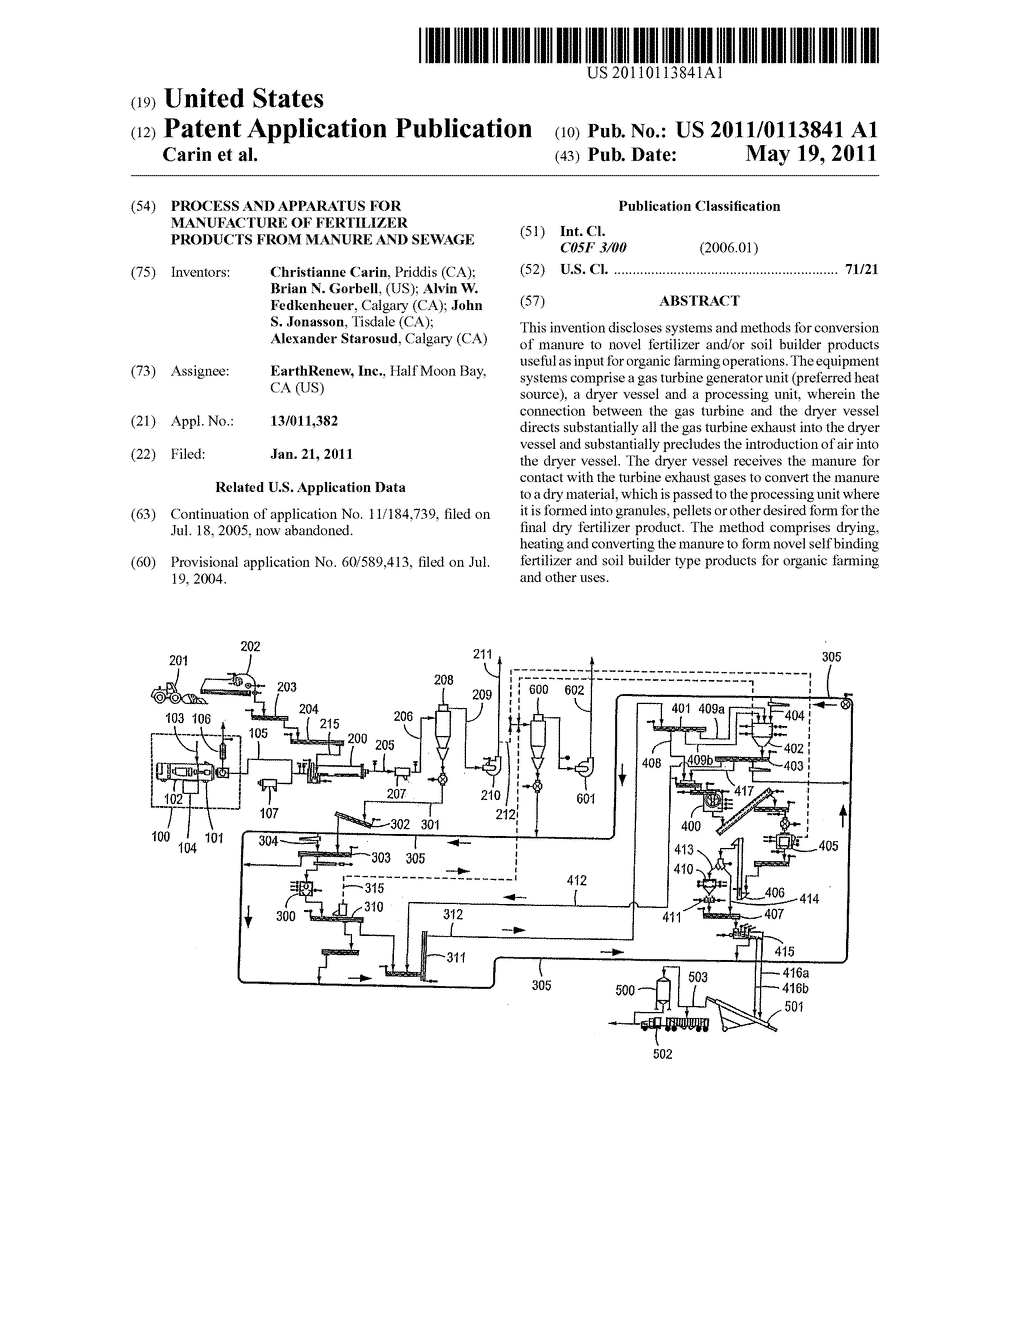 PROCESS AND APPARATUS FOR MANUFACTURE OF FERTILIZER PRODUCTS FROM MANURE AND SEWAGE - diagram, schematic, and image 01